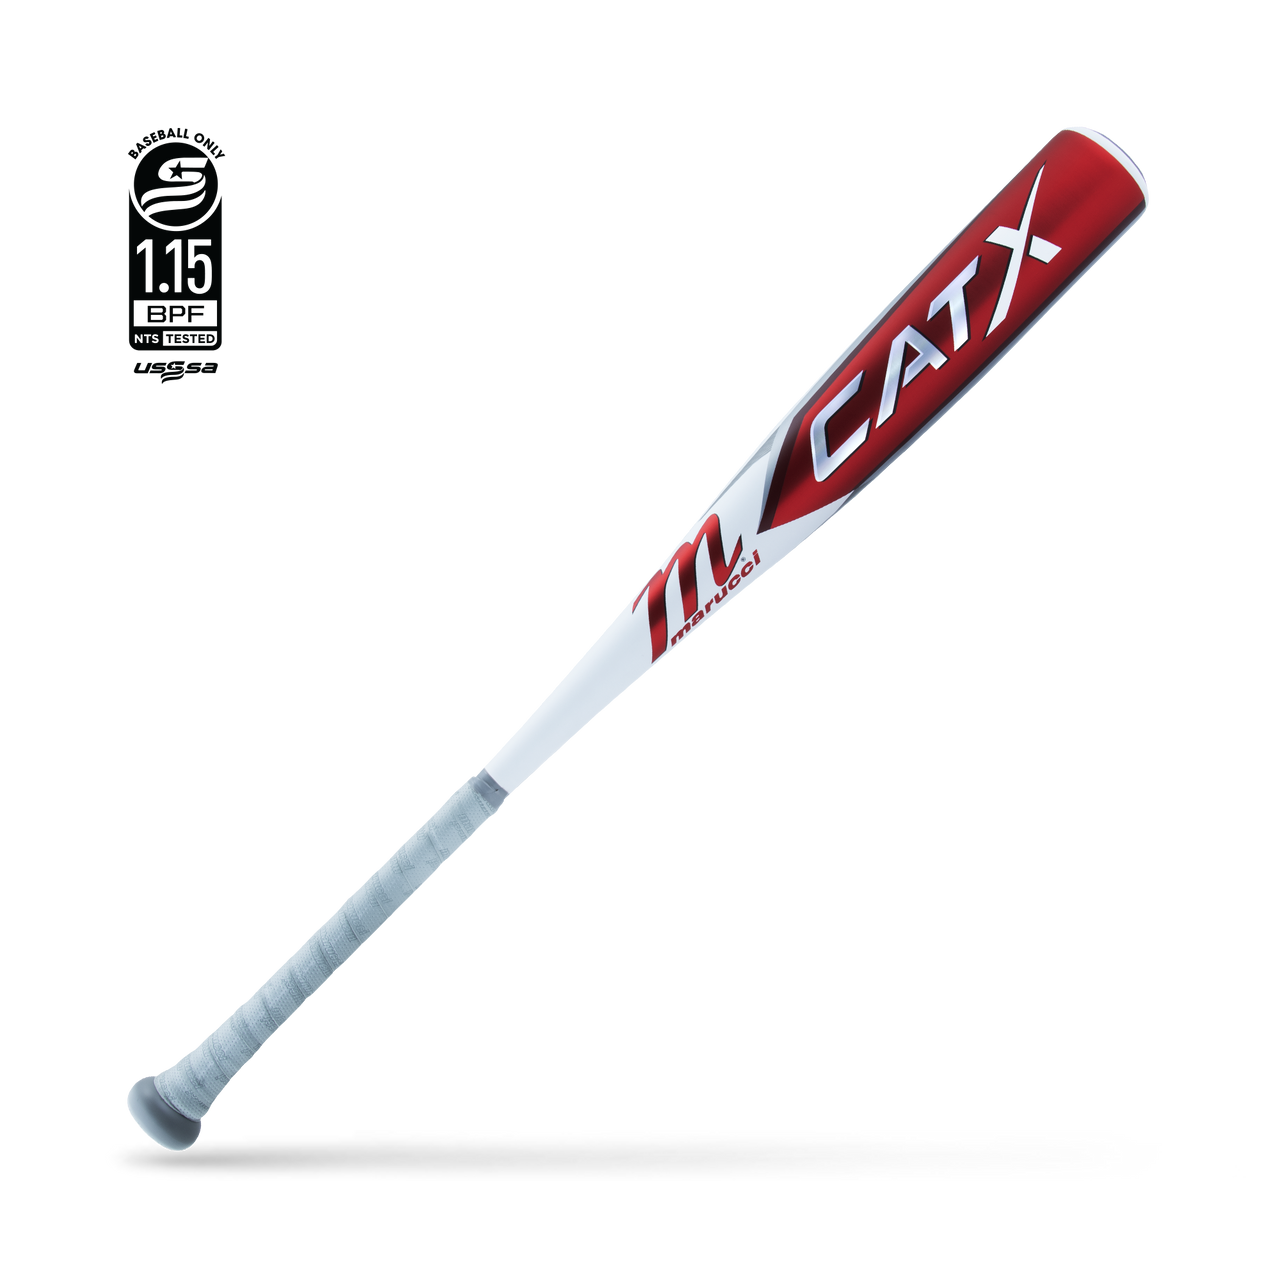 marucci-cat-x-5-usssa-baseball-bat-31-inch-26-oz MSBCX5-3126 Marucci  <p><span style=font-size large;>The CATX Senior League -5 bat is engineered for